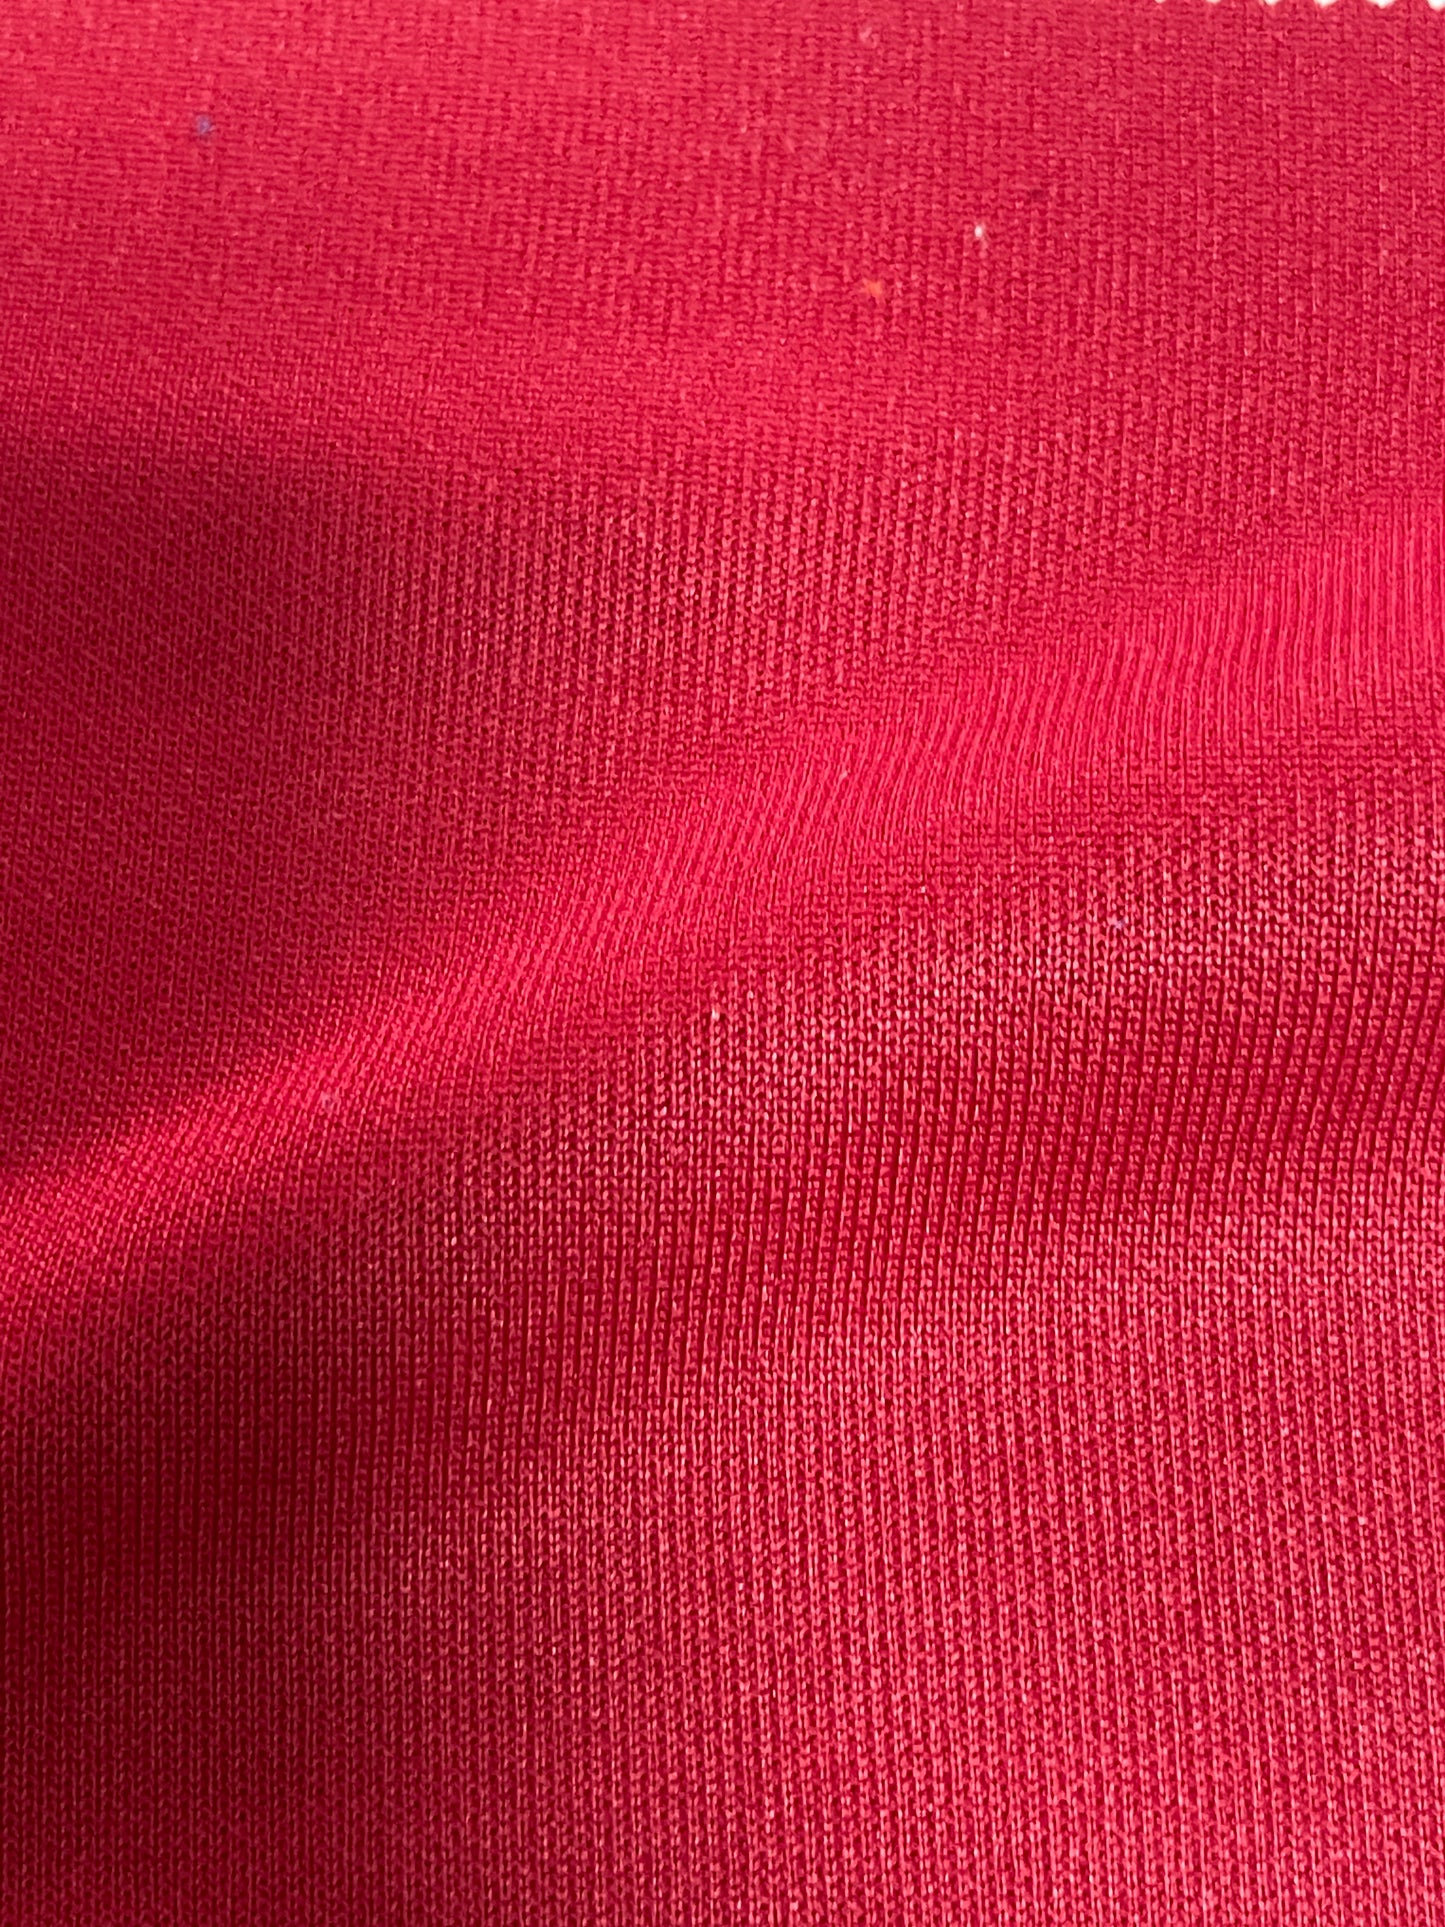 Famous Brand Same Design Blended Knit Fabric--Both Sides can Use! - Natasha Fabric